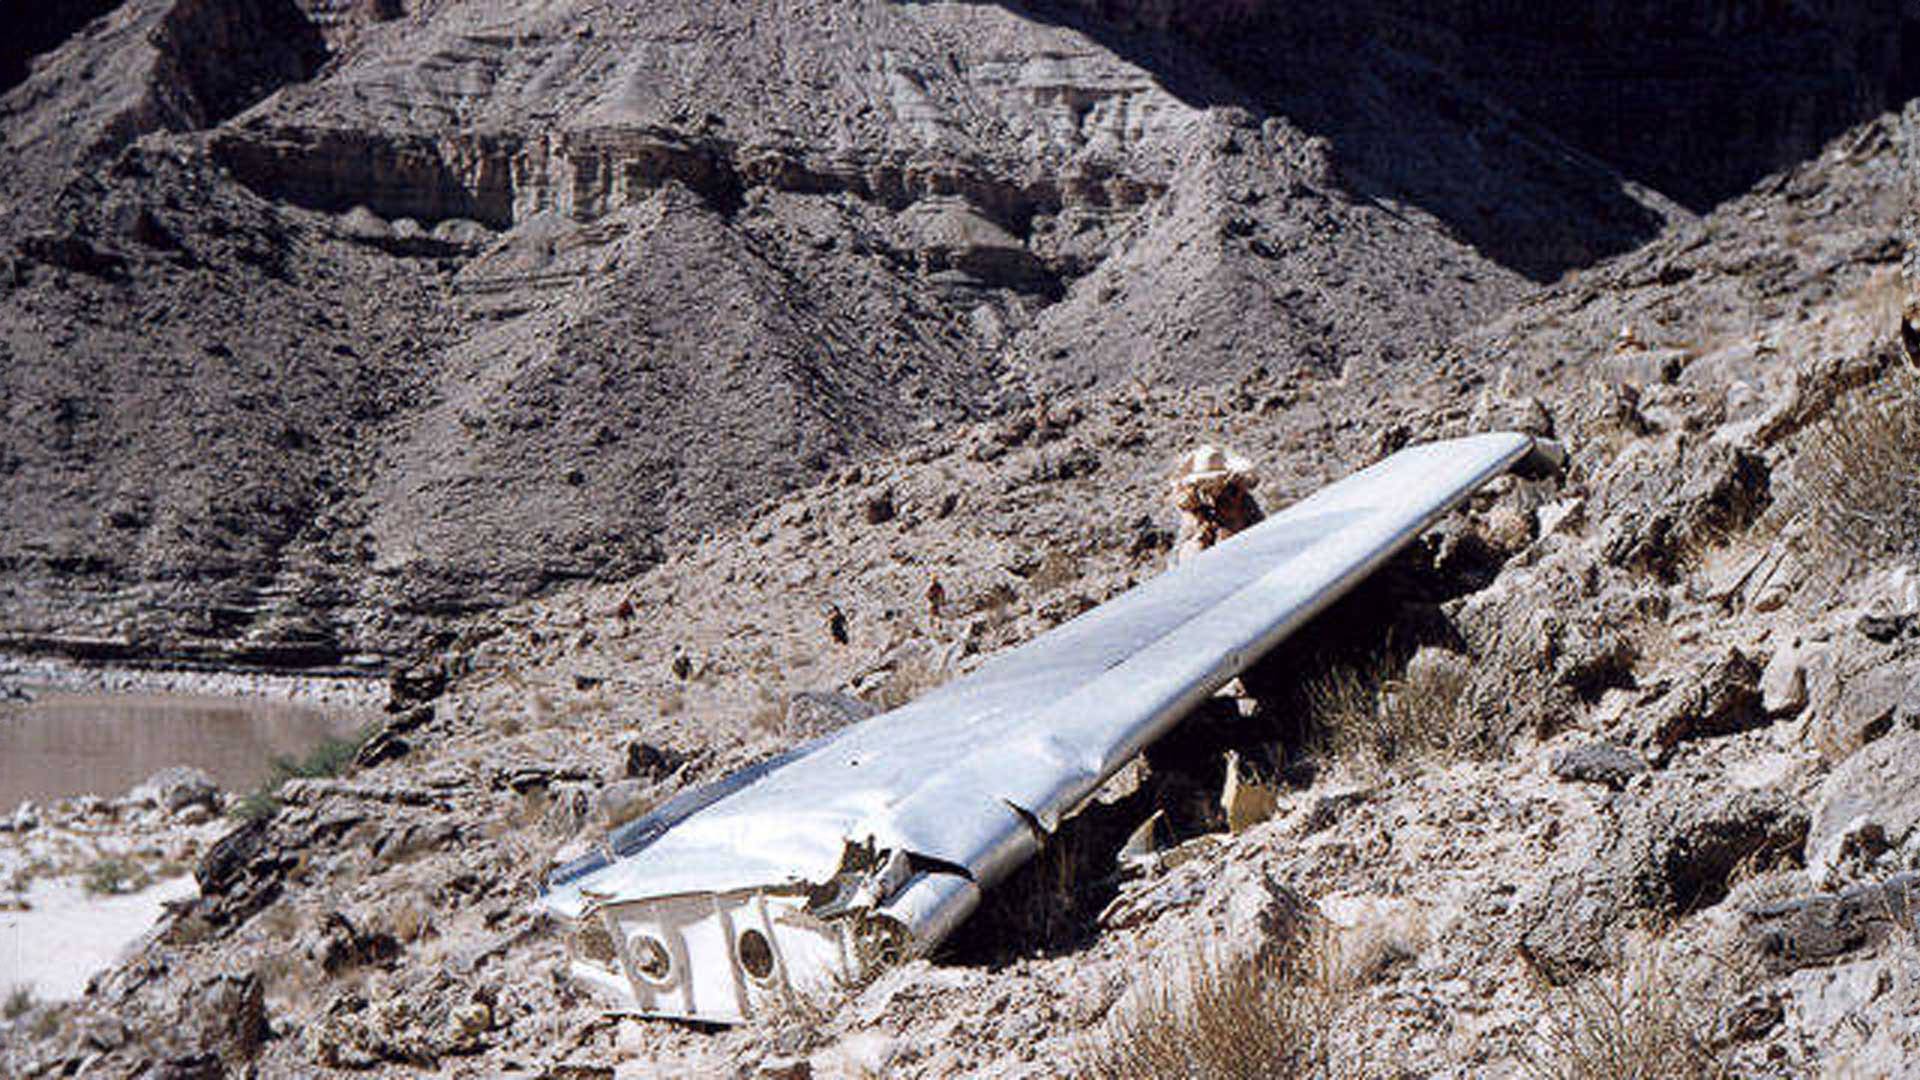 Two planes collided over the Grand Canyon and forever changed aviation